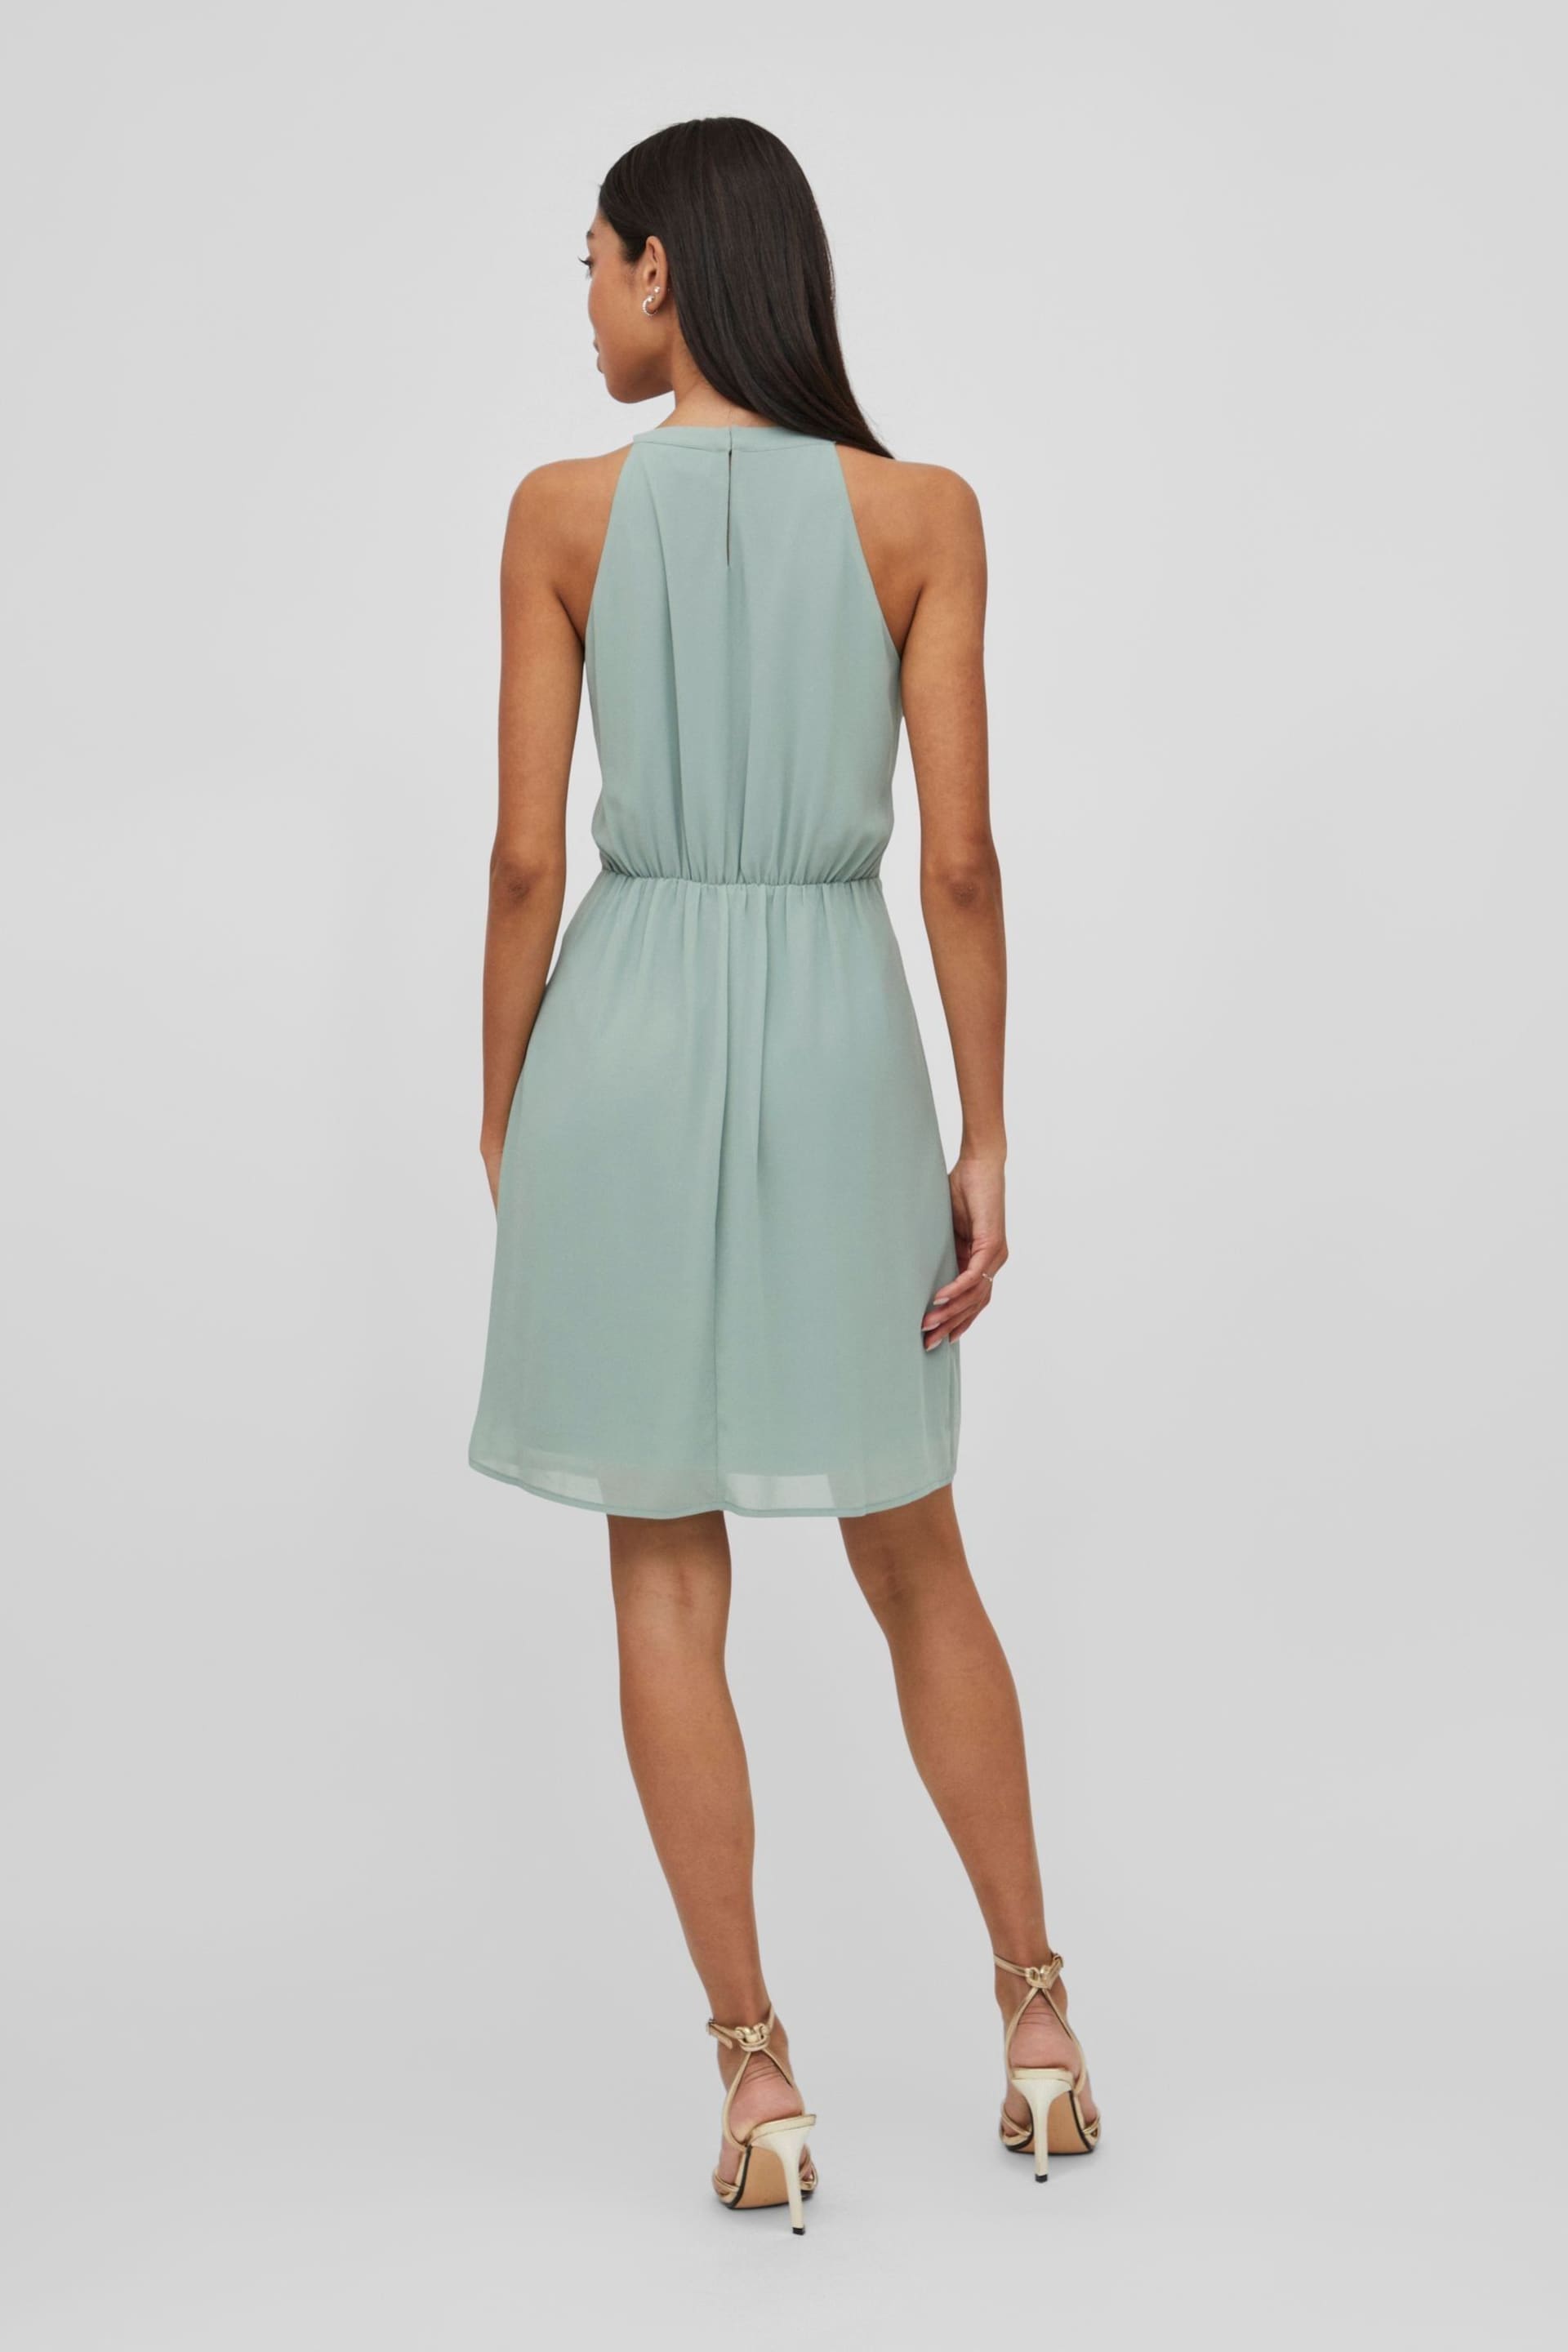 VILA Green Halter Neck Tulle Fit And Flare Dress - Image 2 of 7